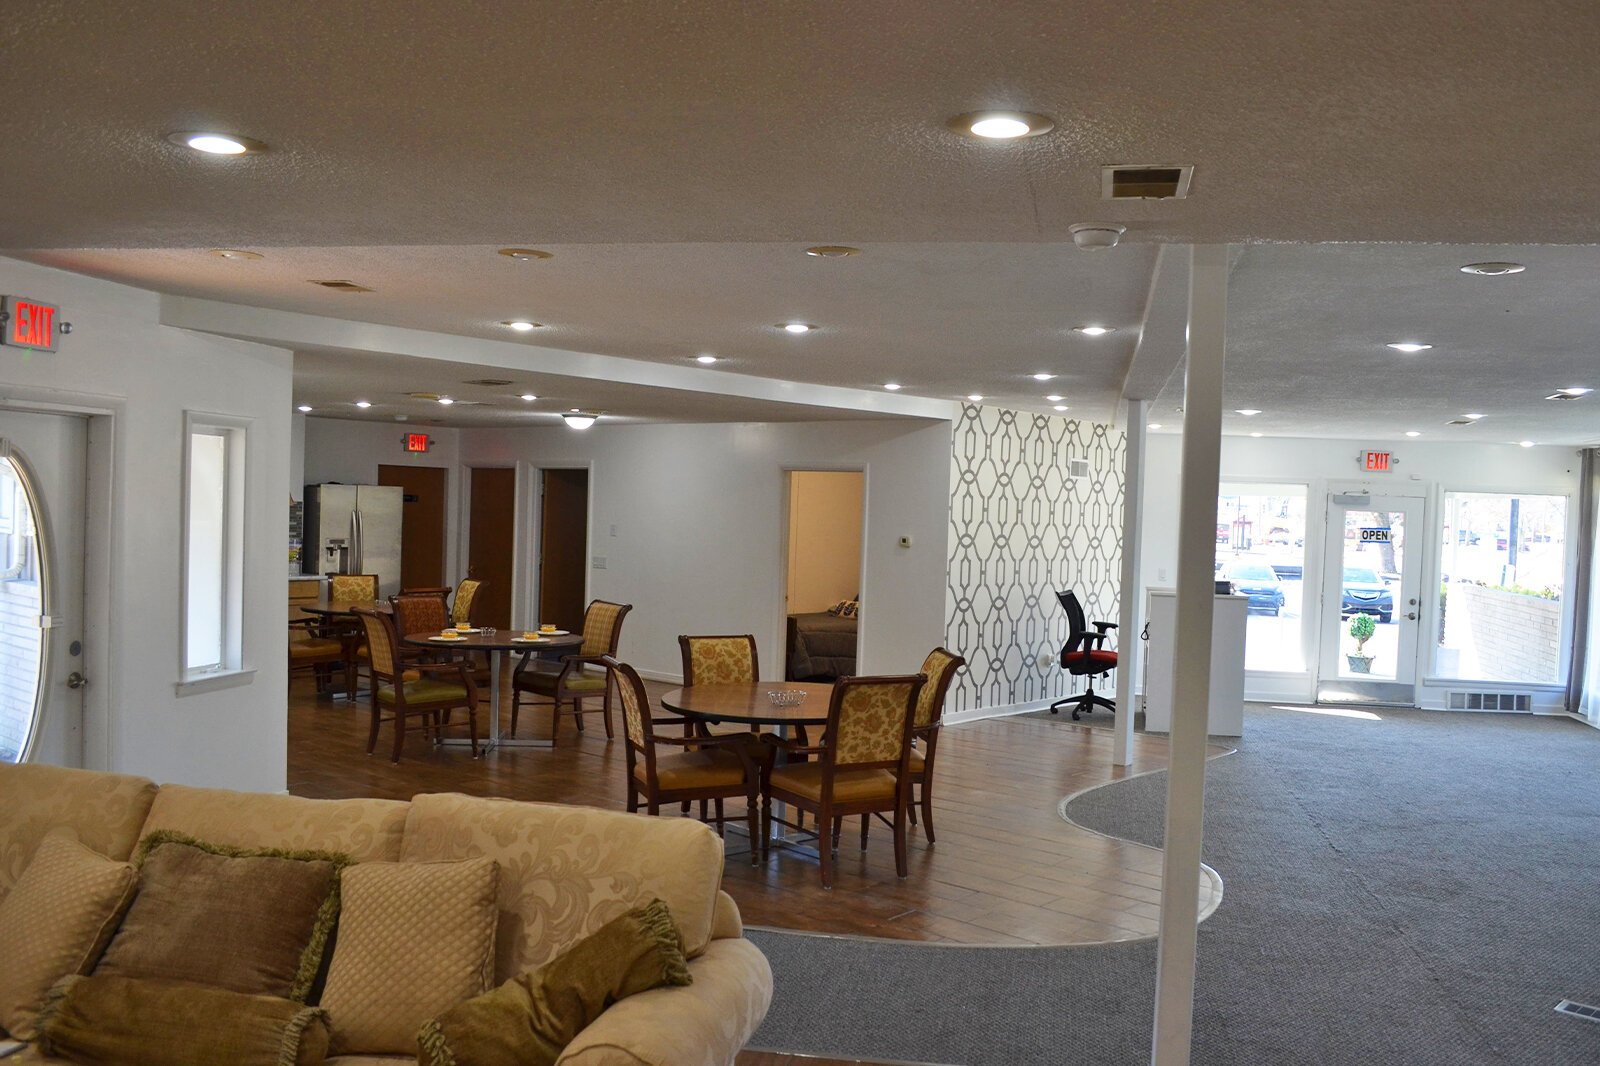 A large portion of Thrive’s space is dedicated to a common area where older adults can enjoy each other's company.